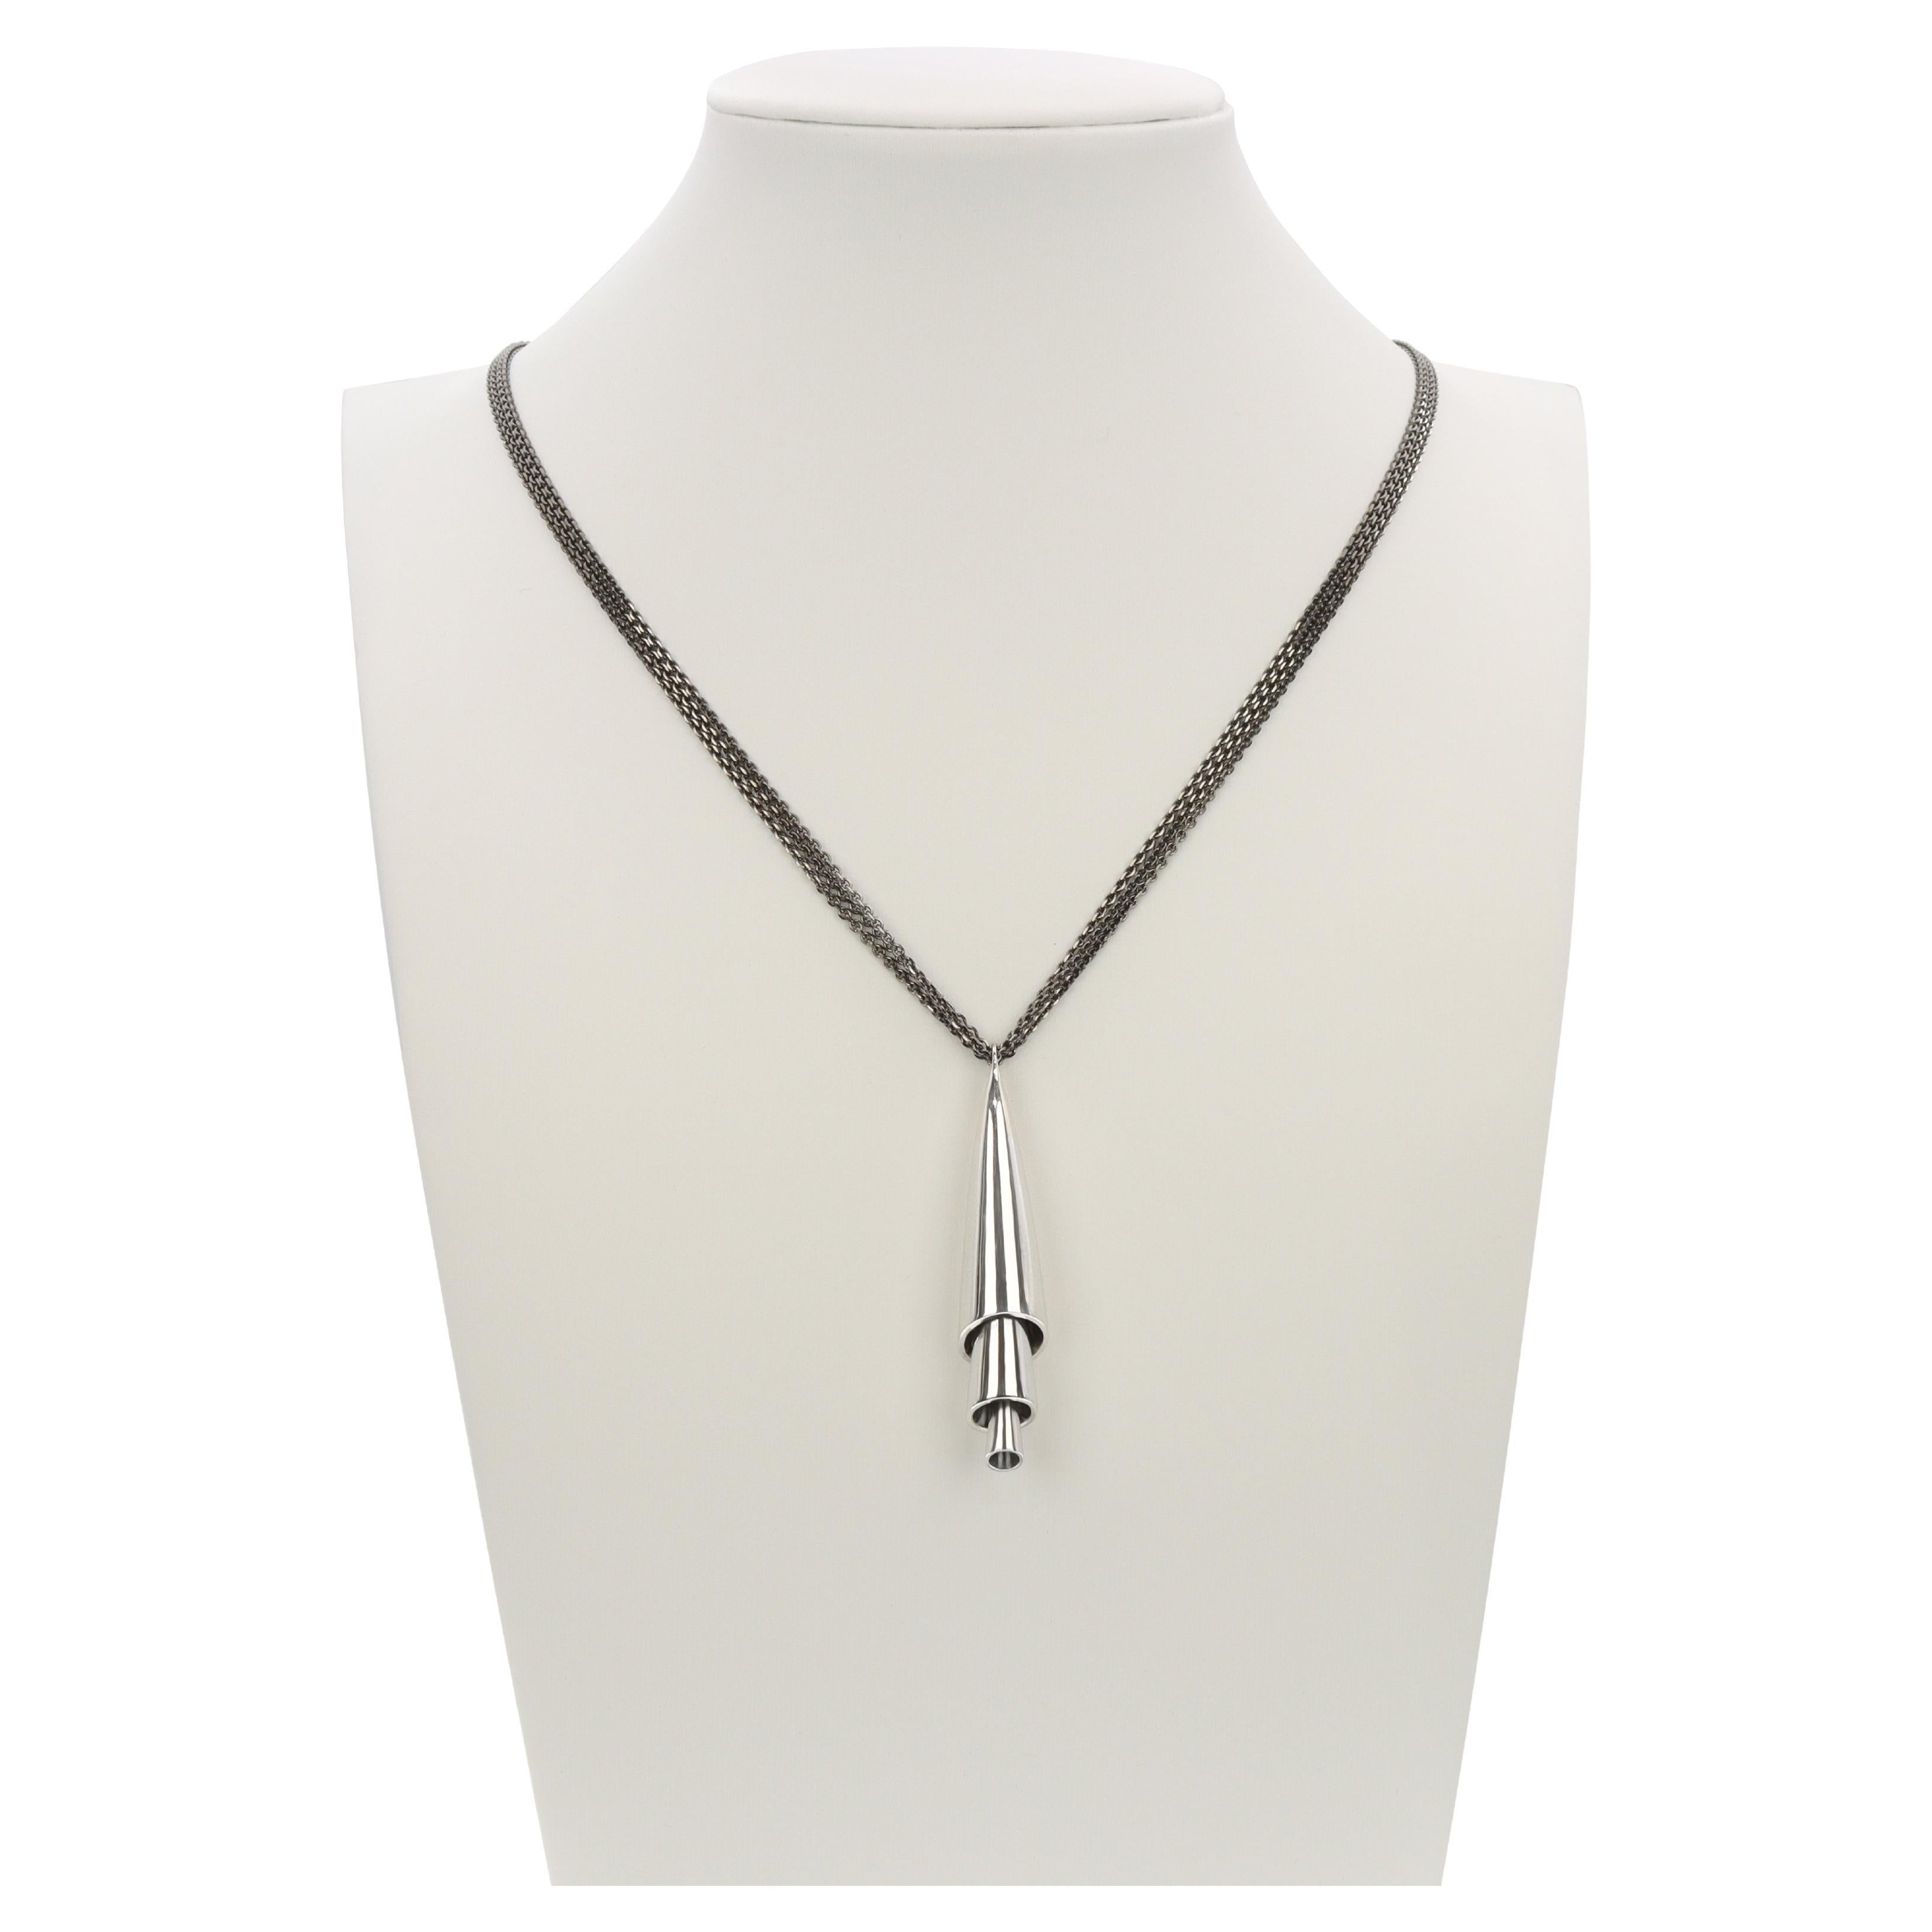 Aventina-Spencer, Limited Edition 'Calla' Sterling Silver Pendant Necklace